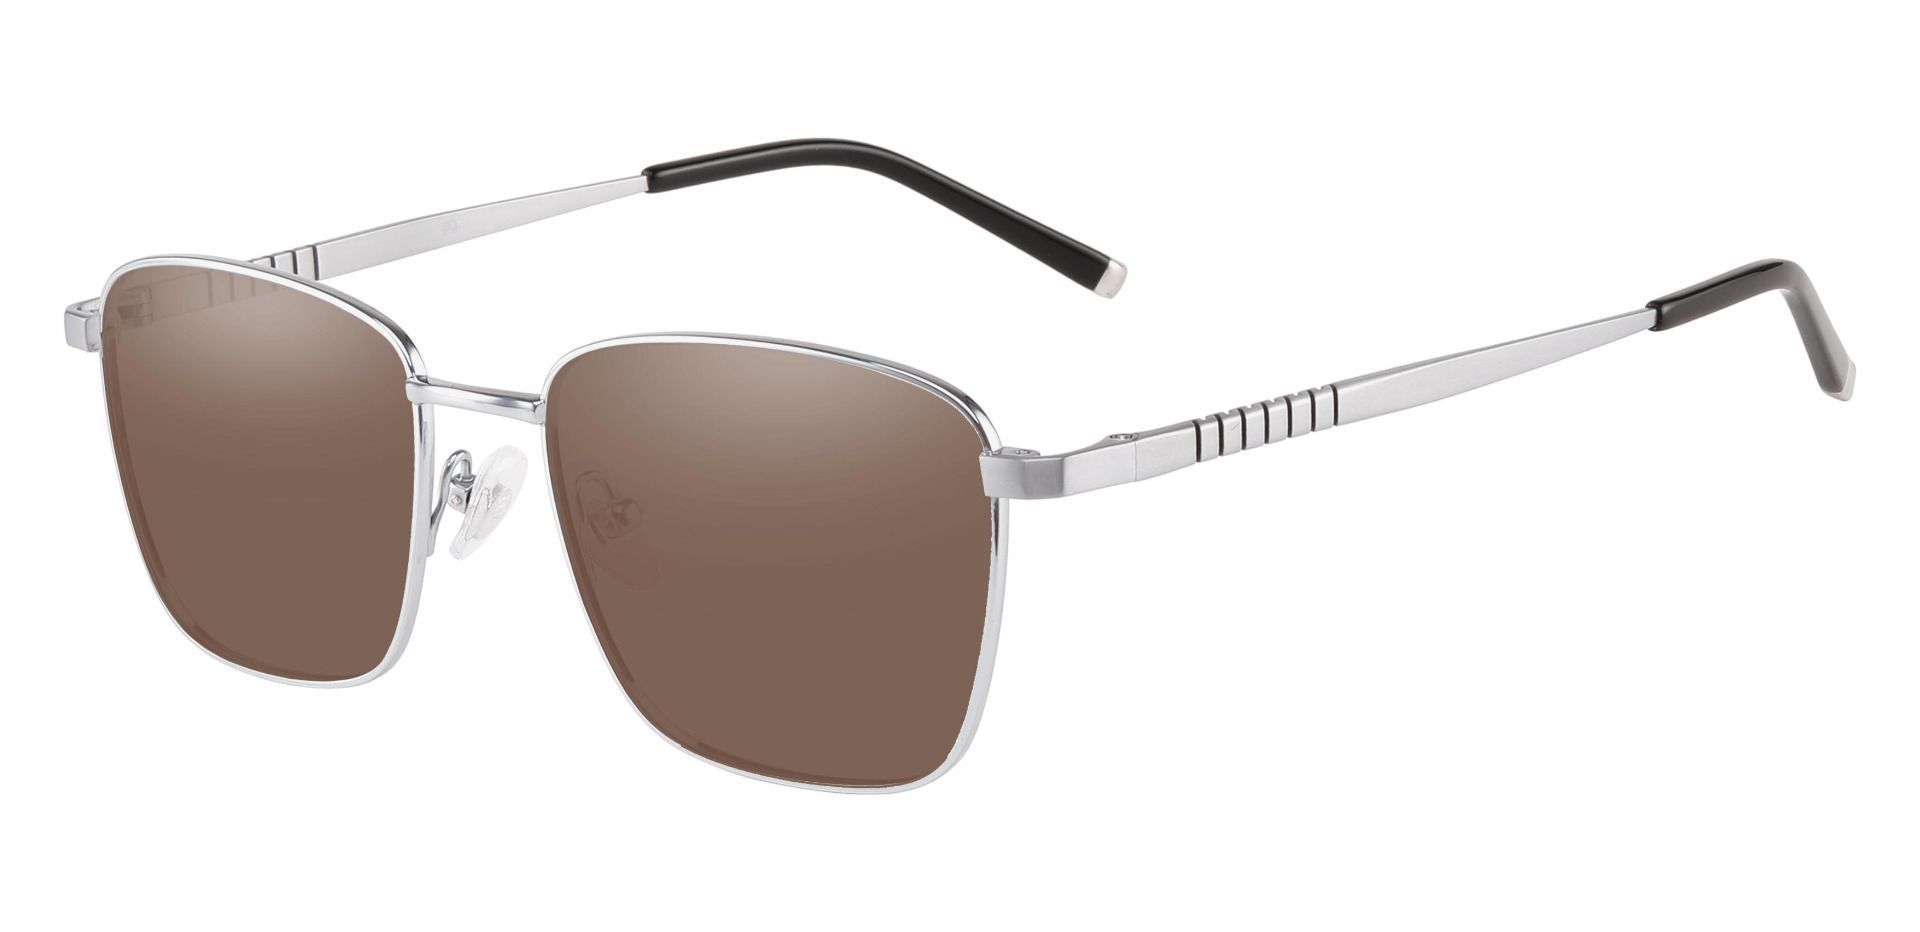 May Square Non-Rx Sunglasses - Silver Frame With Brown Lenses